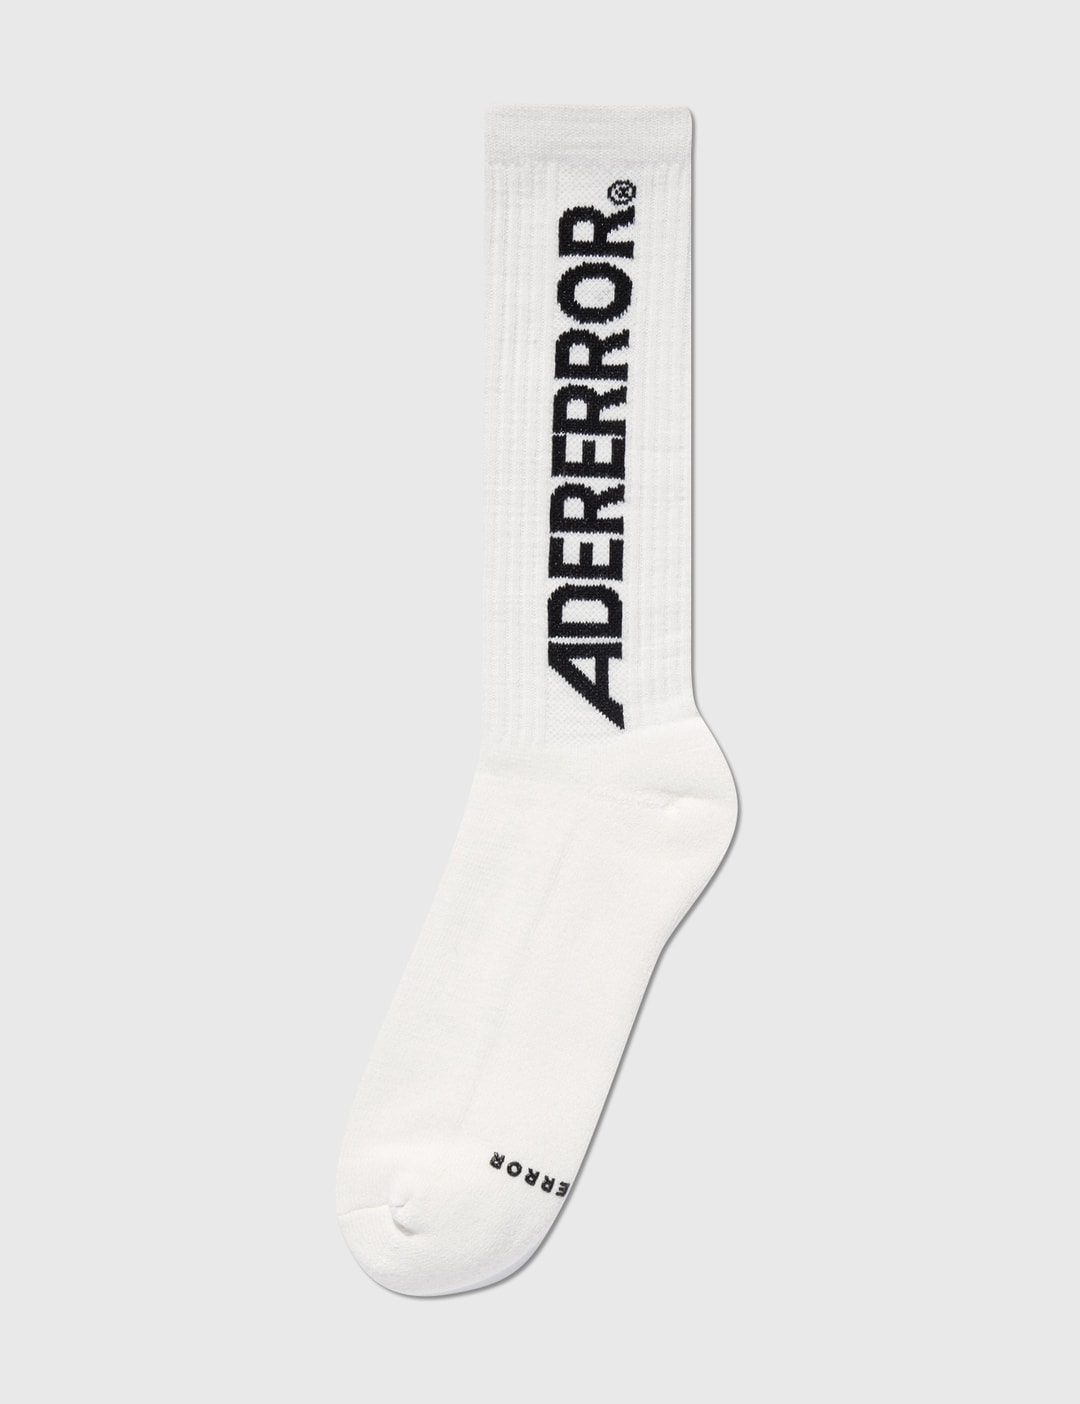 Ader Error - Standic Logo Socks | HBX - Globally Curated Fashion and